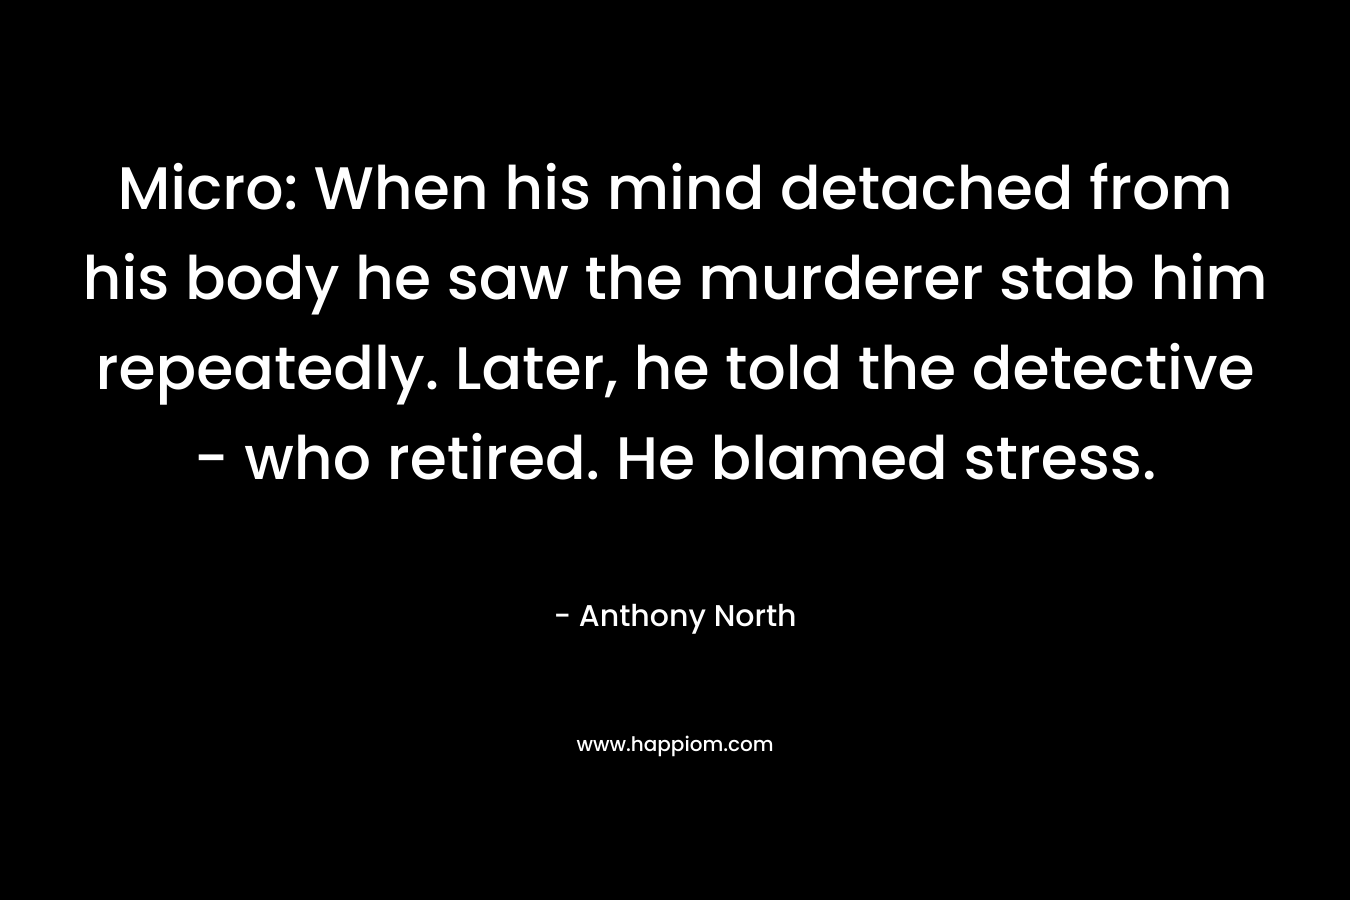 Micro: When his mind detached from his body he saw the murderer stab him repeatedly. Later, he told the detective – who retired. He blamed stress. – Anthony   North